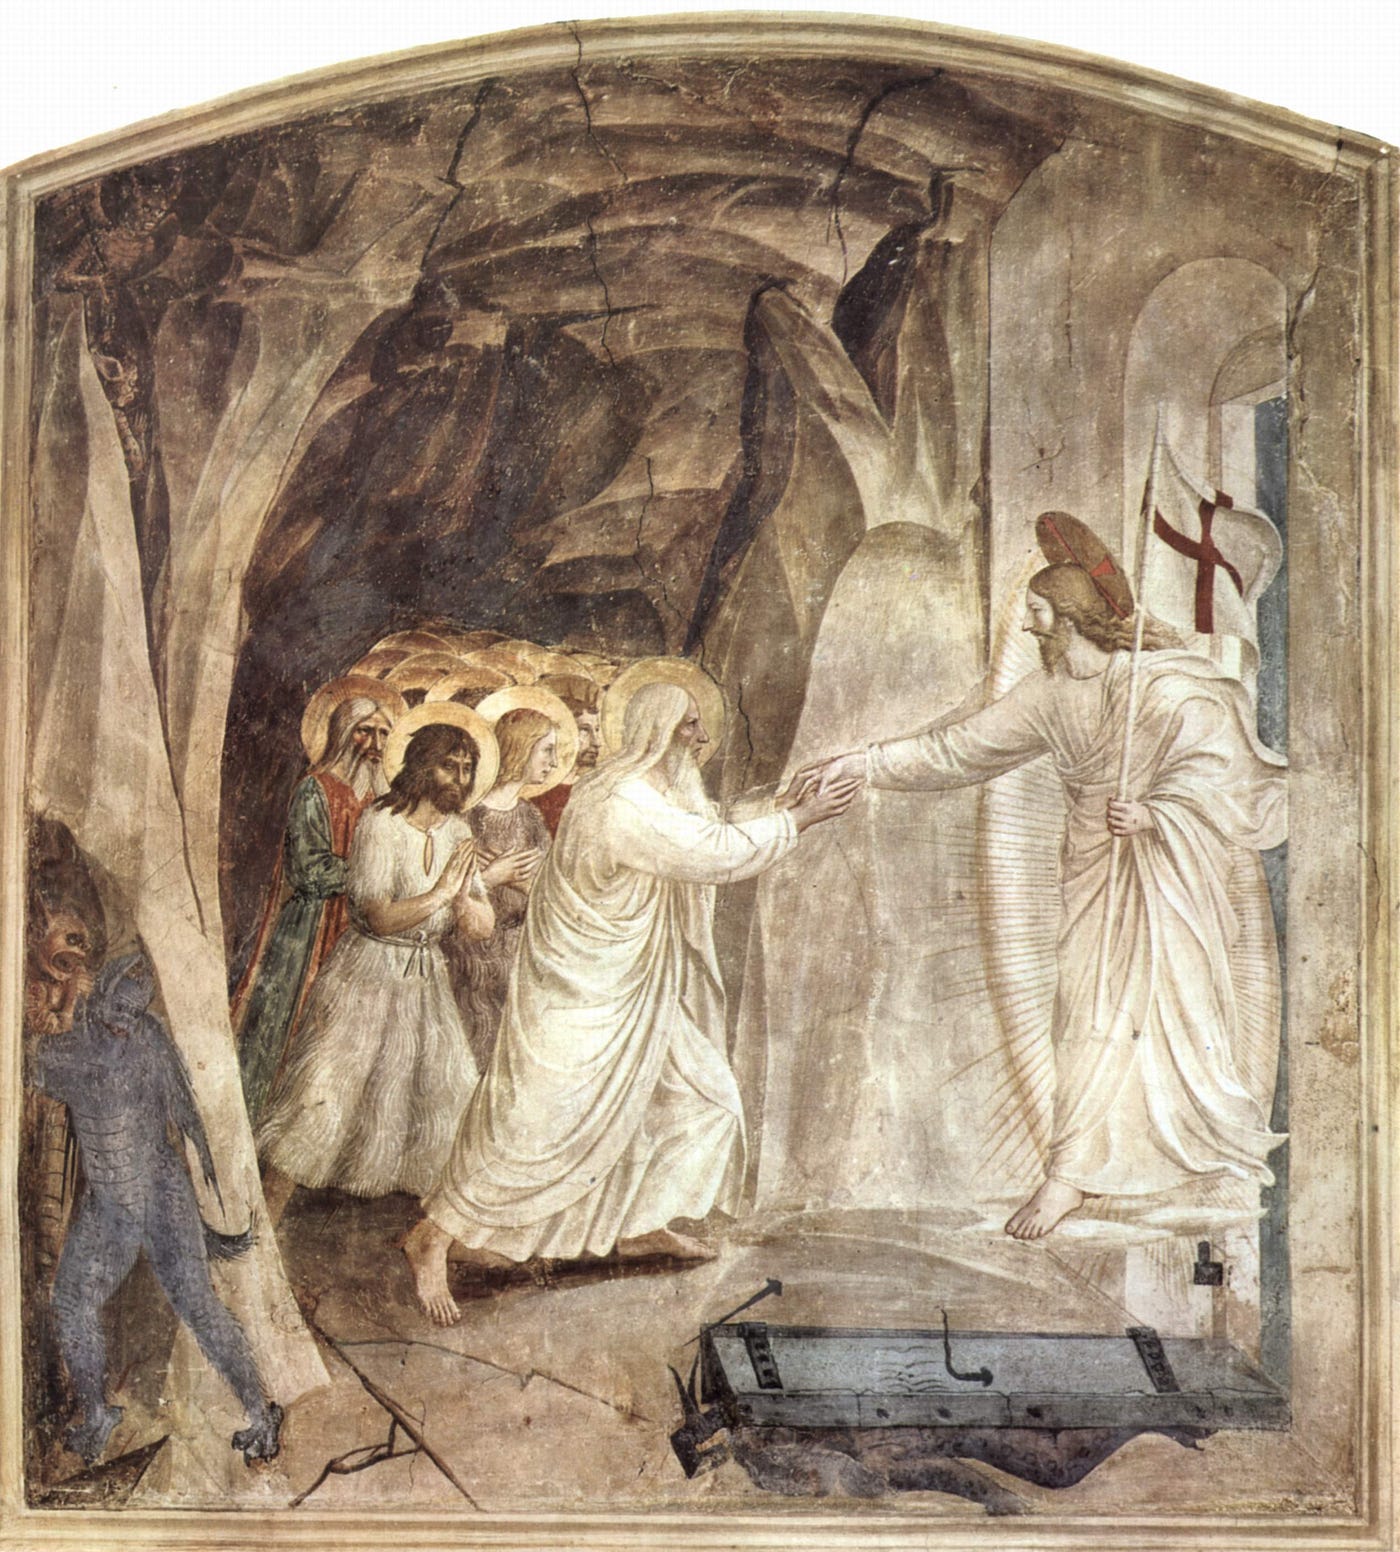 Dante and Virgil in Hell: Love, Friendship, and Salvation in The